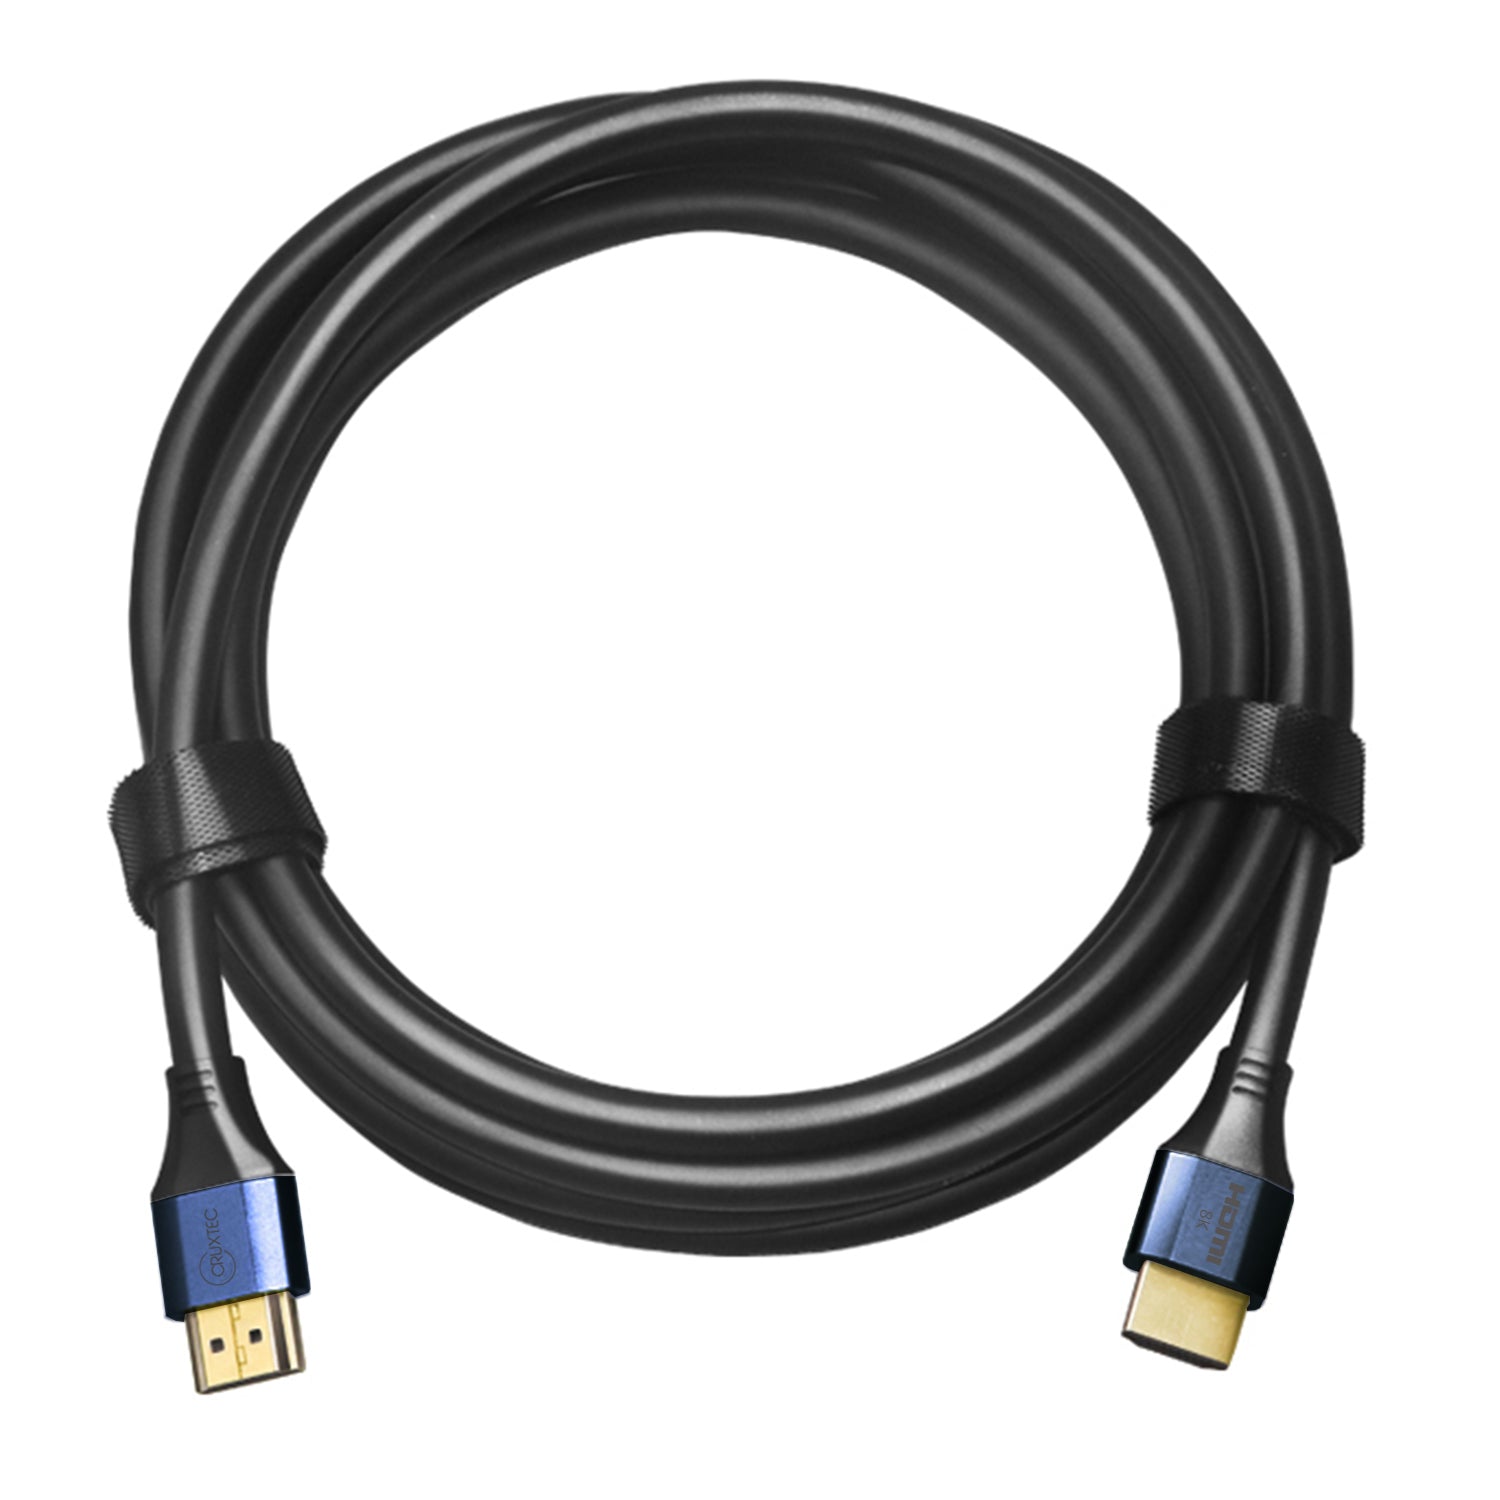 Cruxtec 3m Certified Ultra High Speed HDMI 2.1 Cable 48Gbps ( 8K@60Hz, –  HOYUN